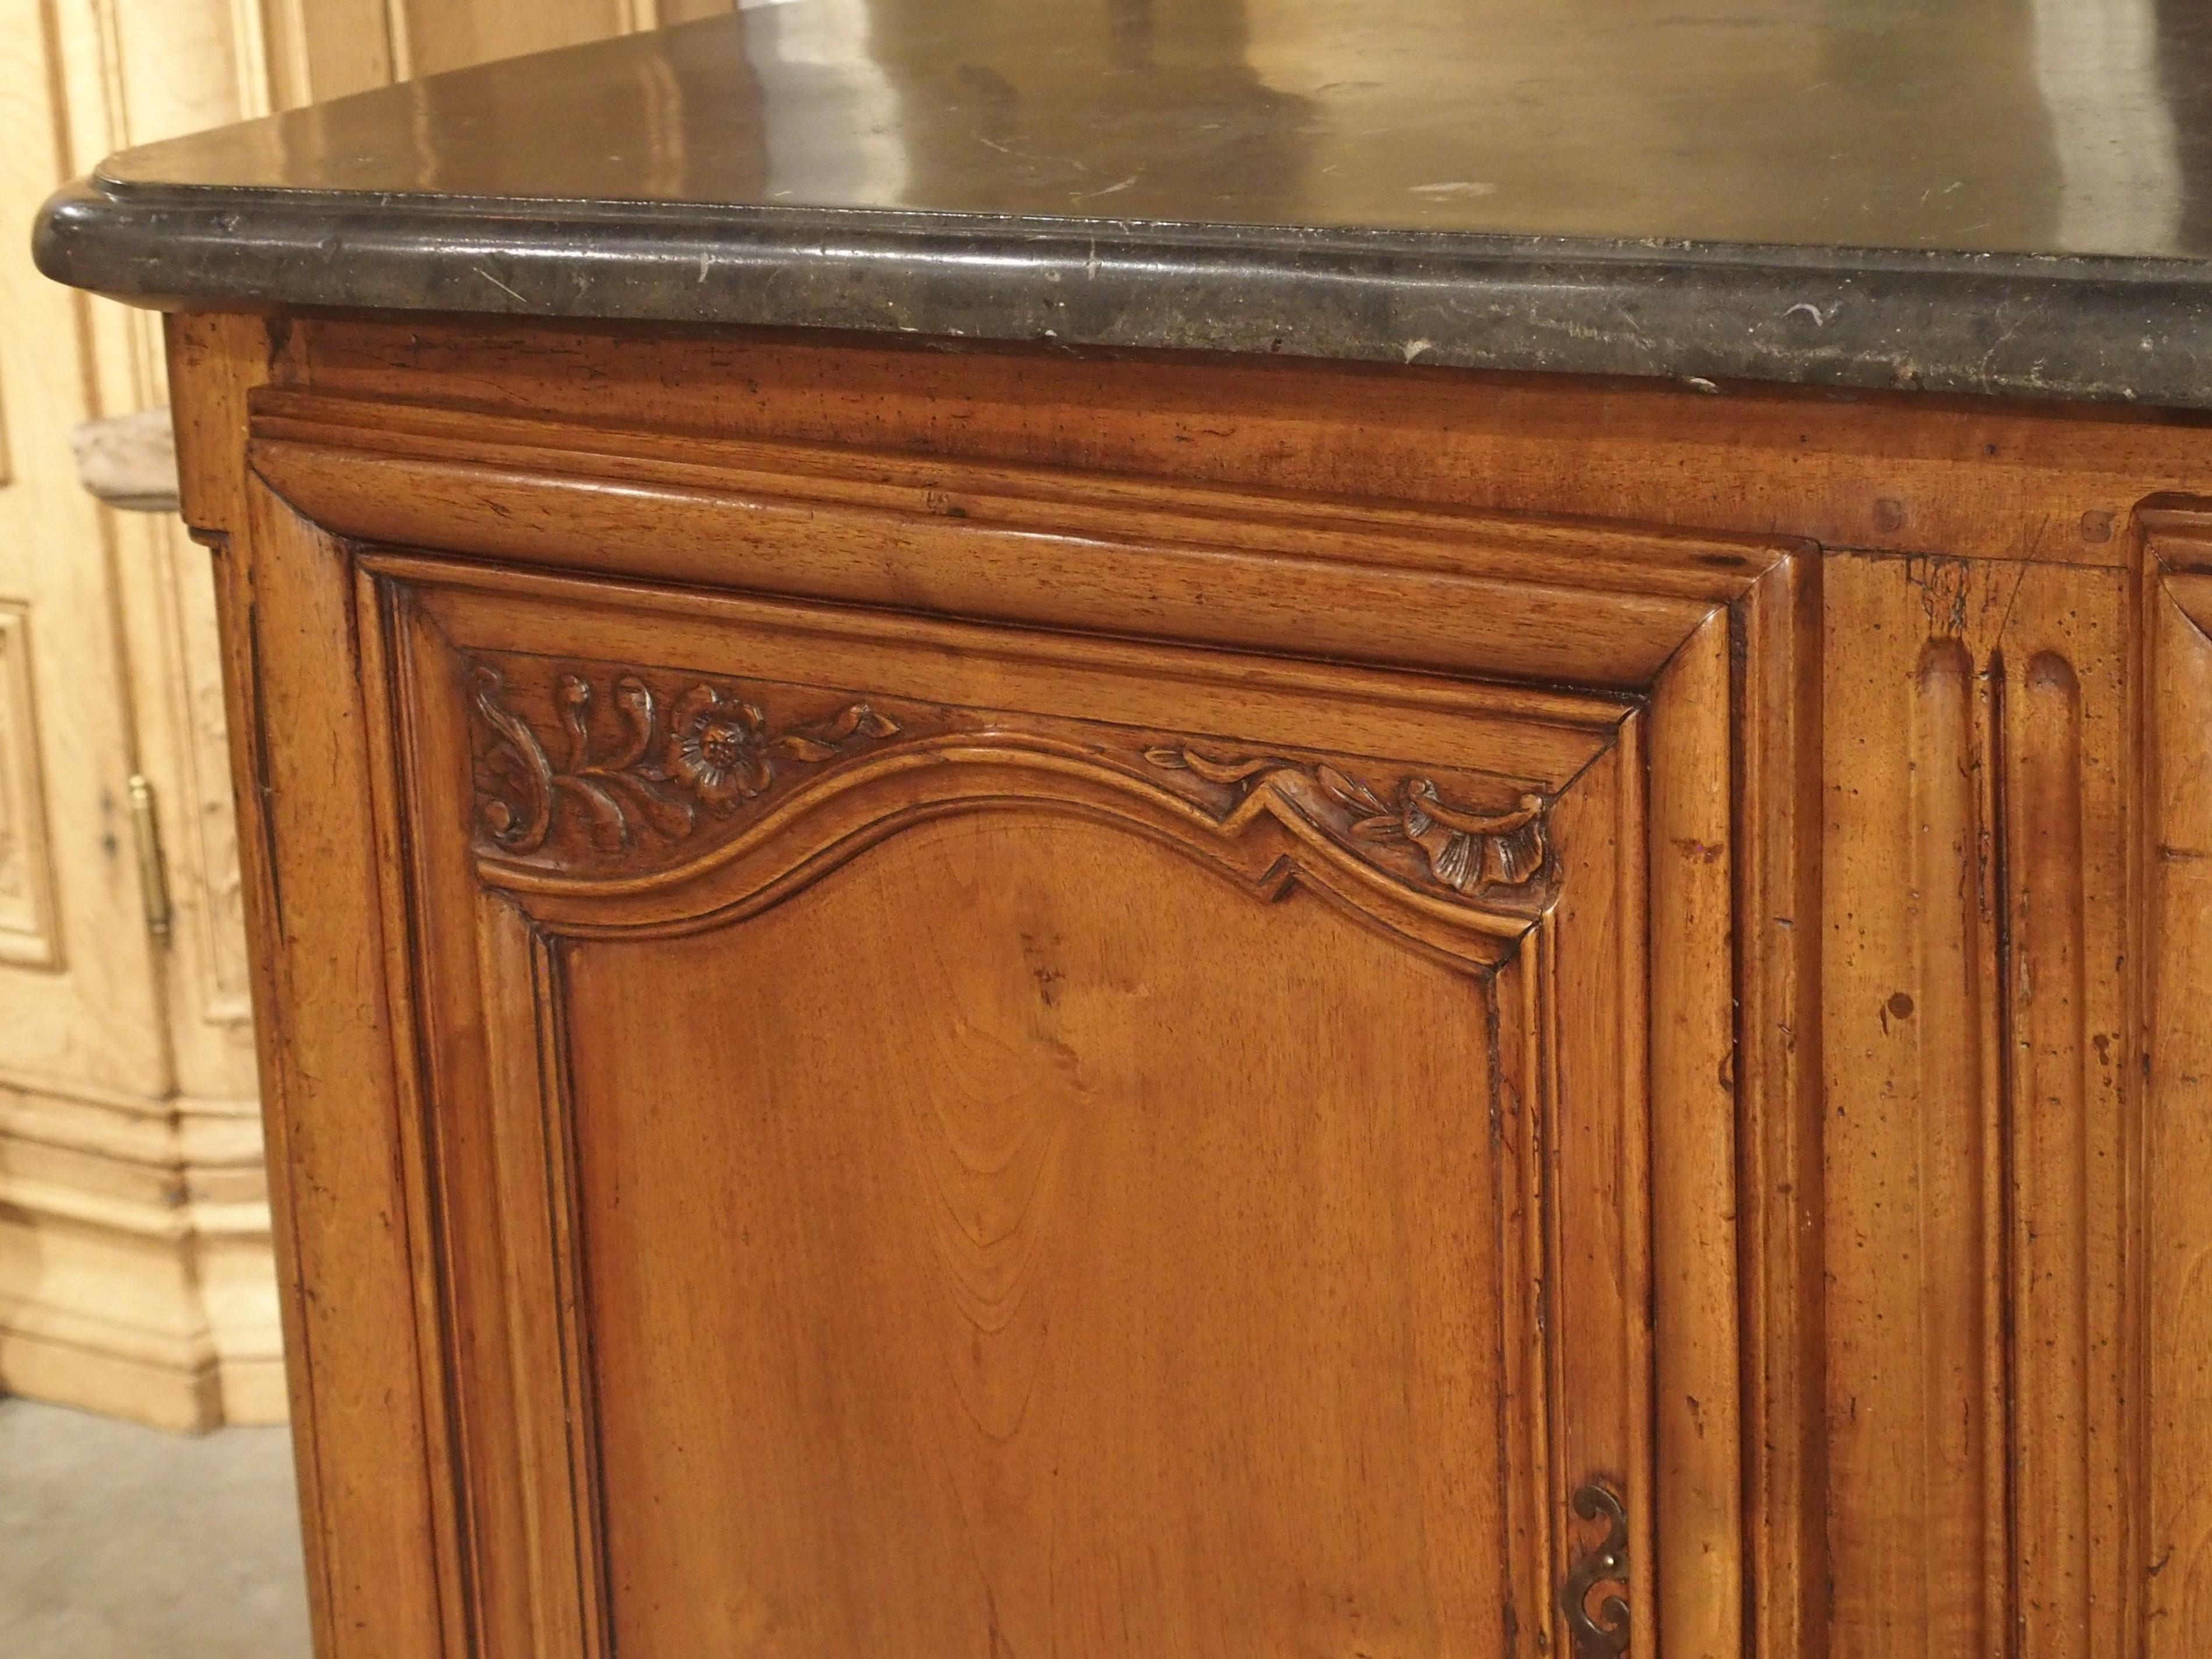 This beautiful walnut buffet de chasse (hunting buffet) is characteristic of furniture from the Rhone-Alpes region of France during the Louis XV period. Topped with a dark gray Saint Cyr stone with marine inclusions, the buffet was hand-carved in